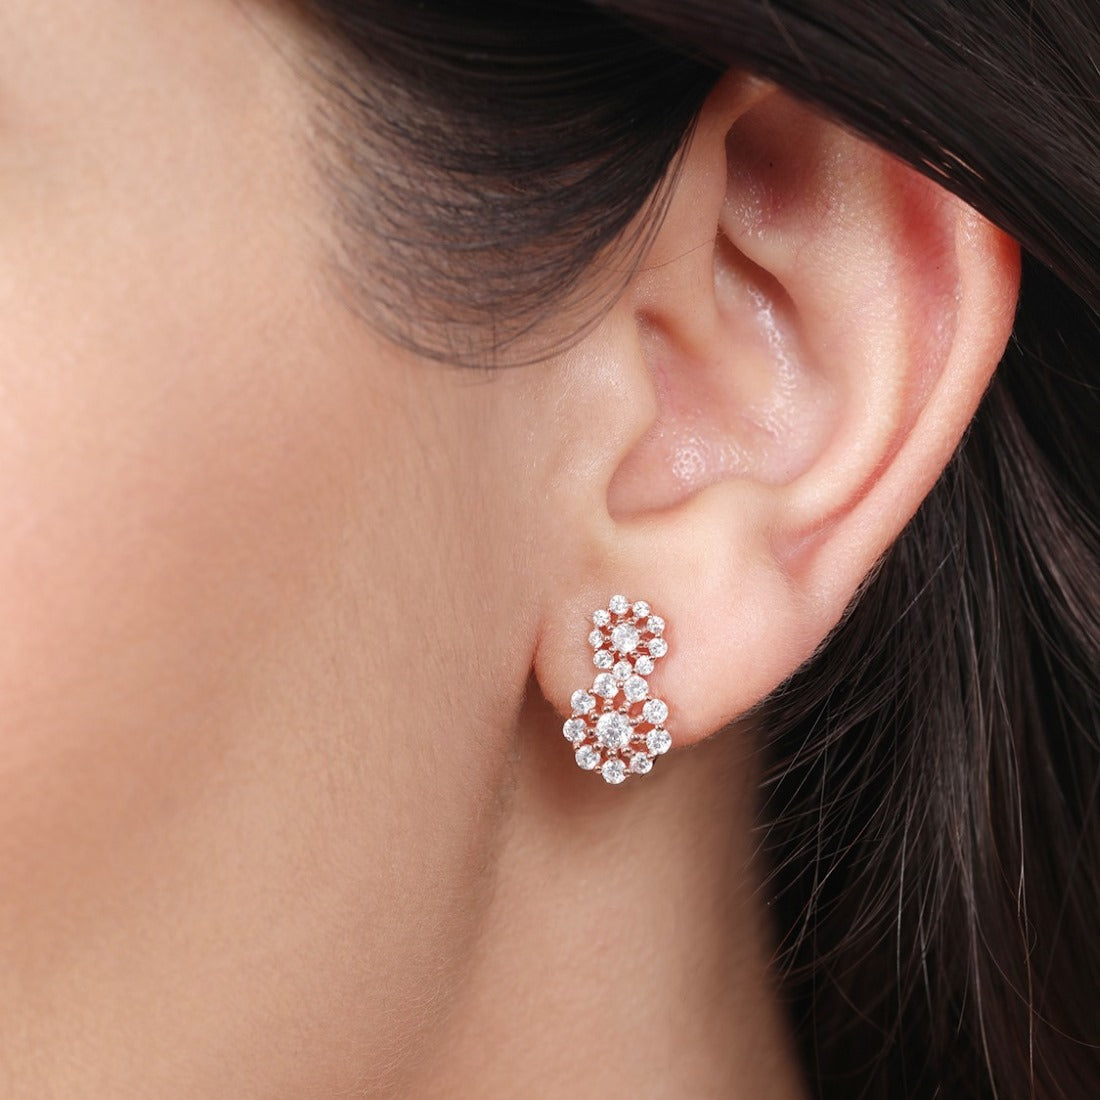 CZ Studded Rose Gold Plated 925 Sterling Silver Cluster Earrings